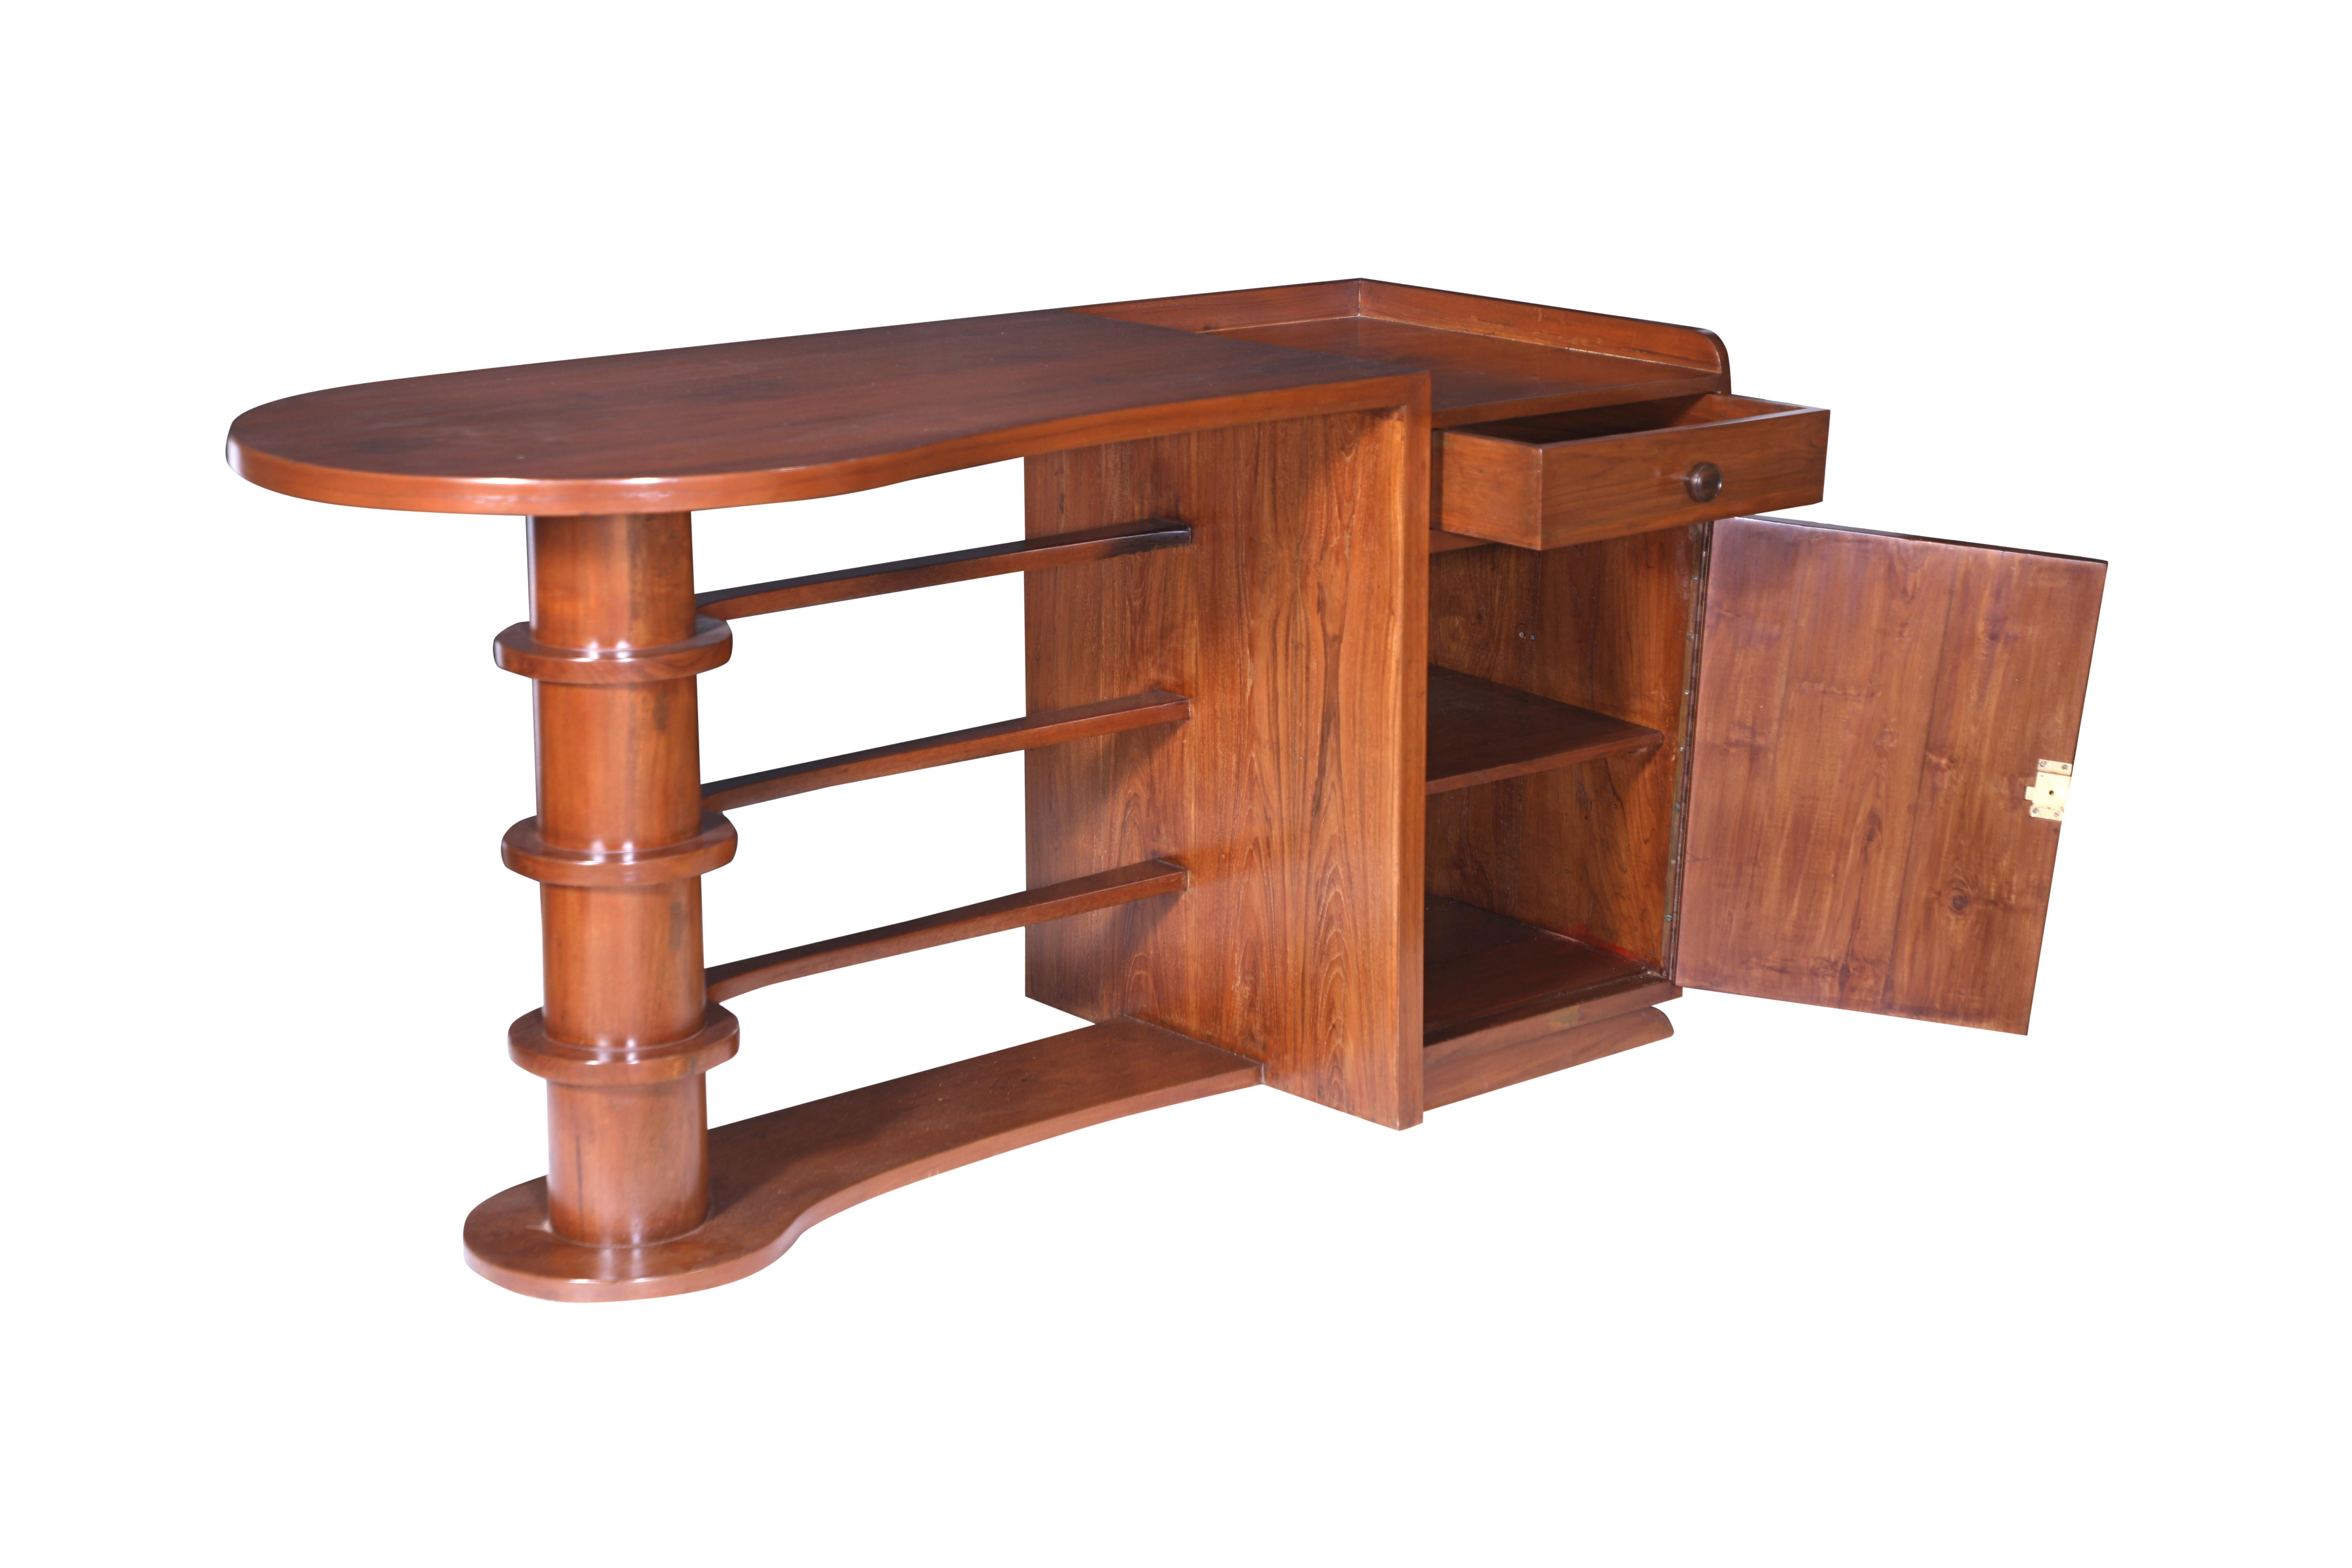 20th Century Mid-Century Modern Teak Writing Desk or Console Table For Sale